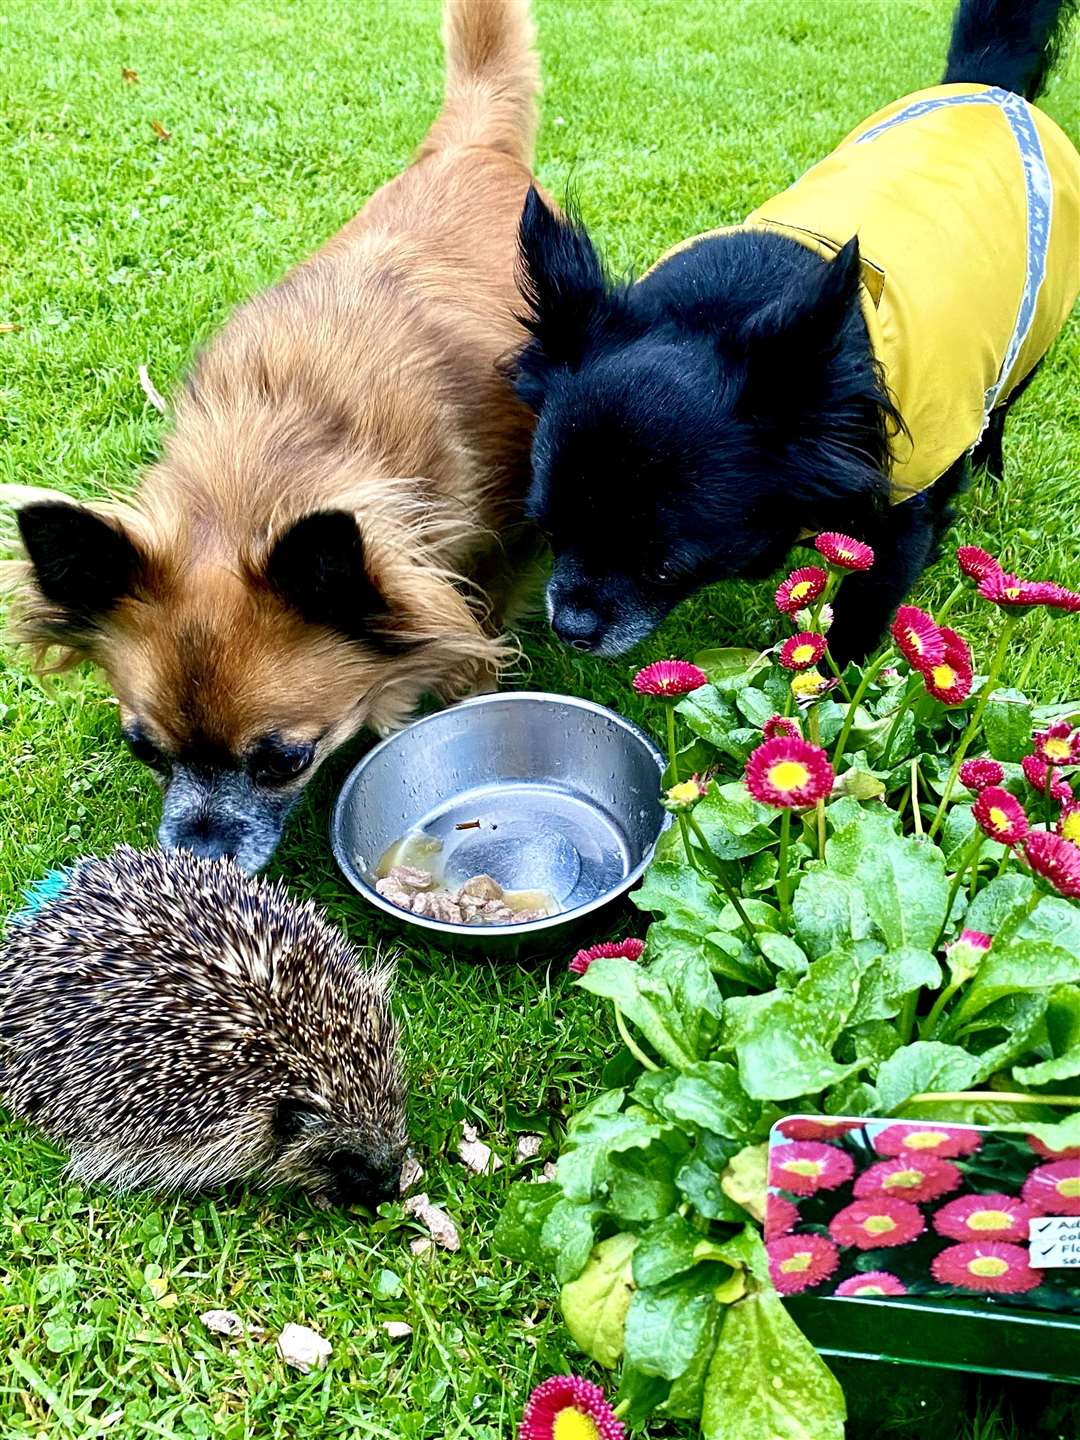 Louis with his brother Benjamin Buttons inspect a rescued hedgehog at Lyth. The brothers are both rescue dogs.